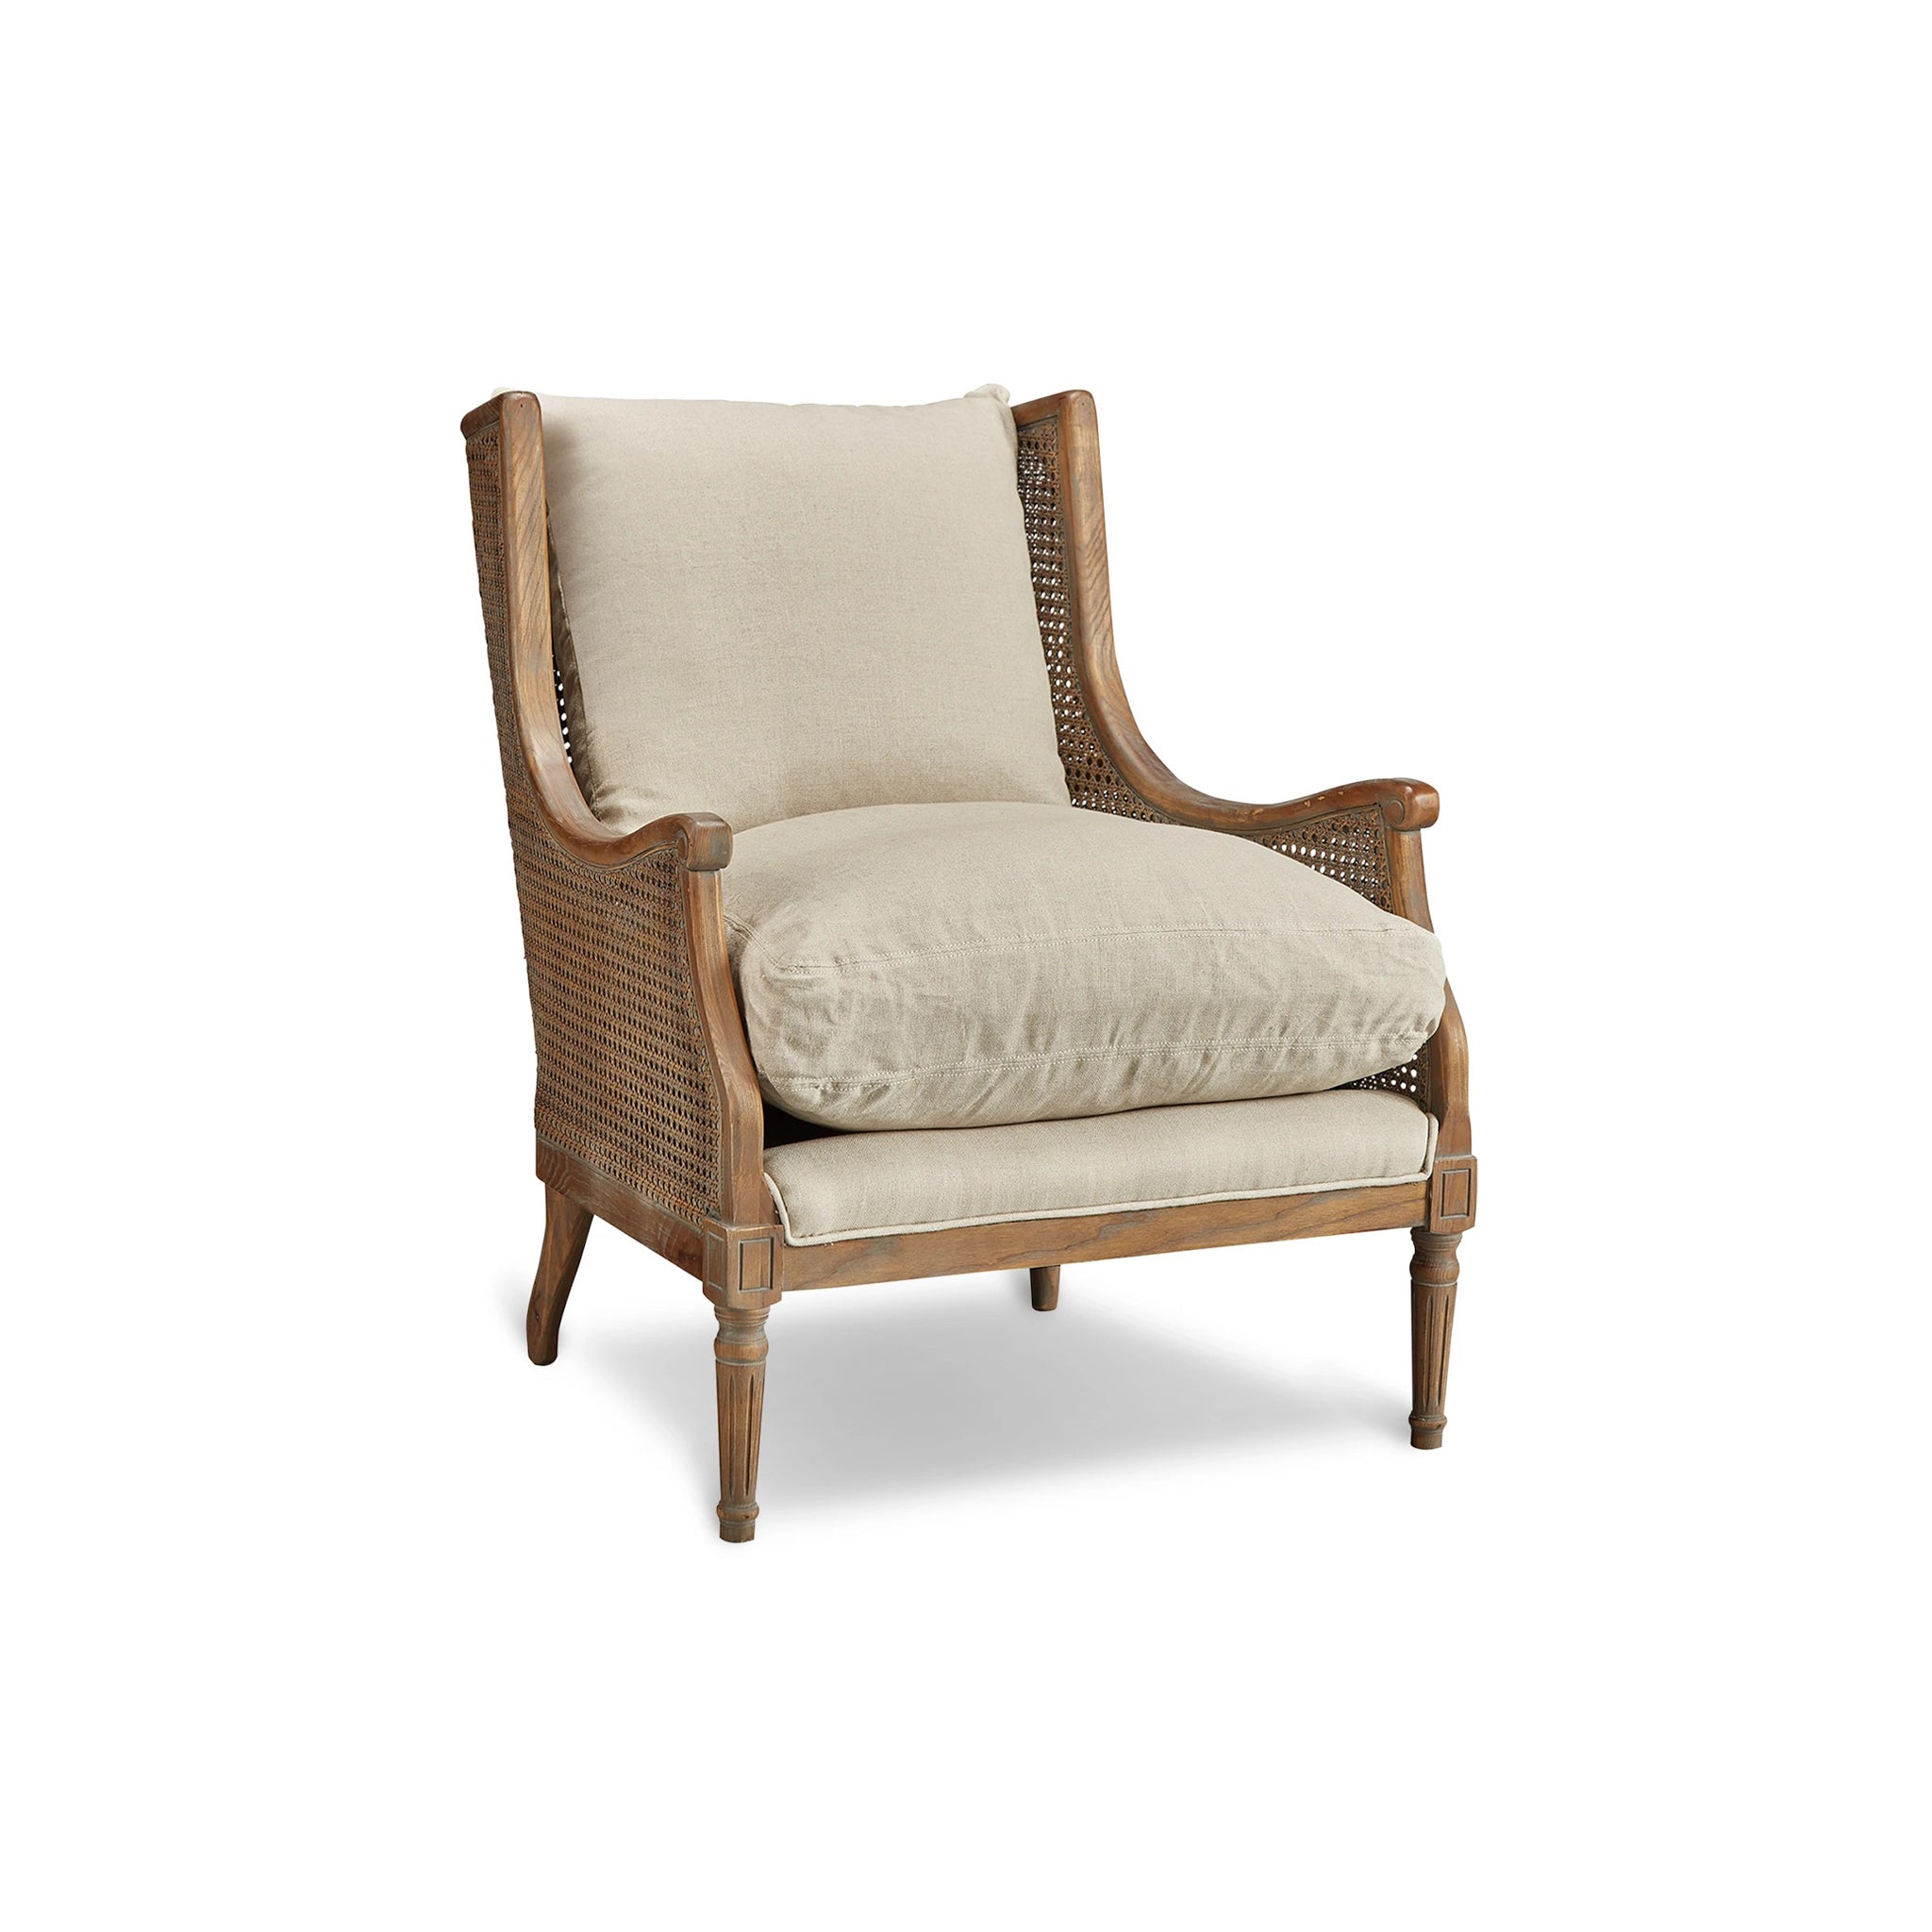 The Drawing Room Chair